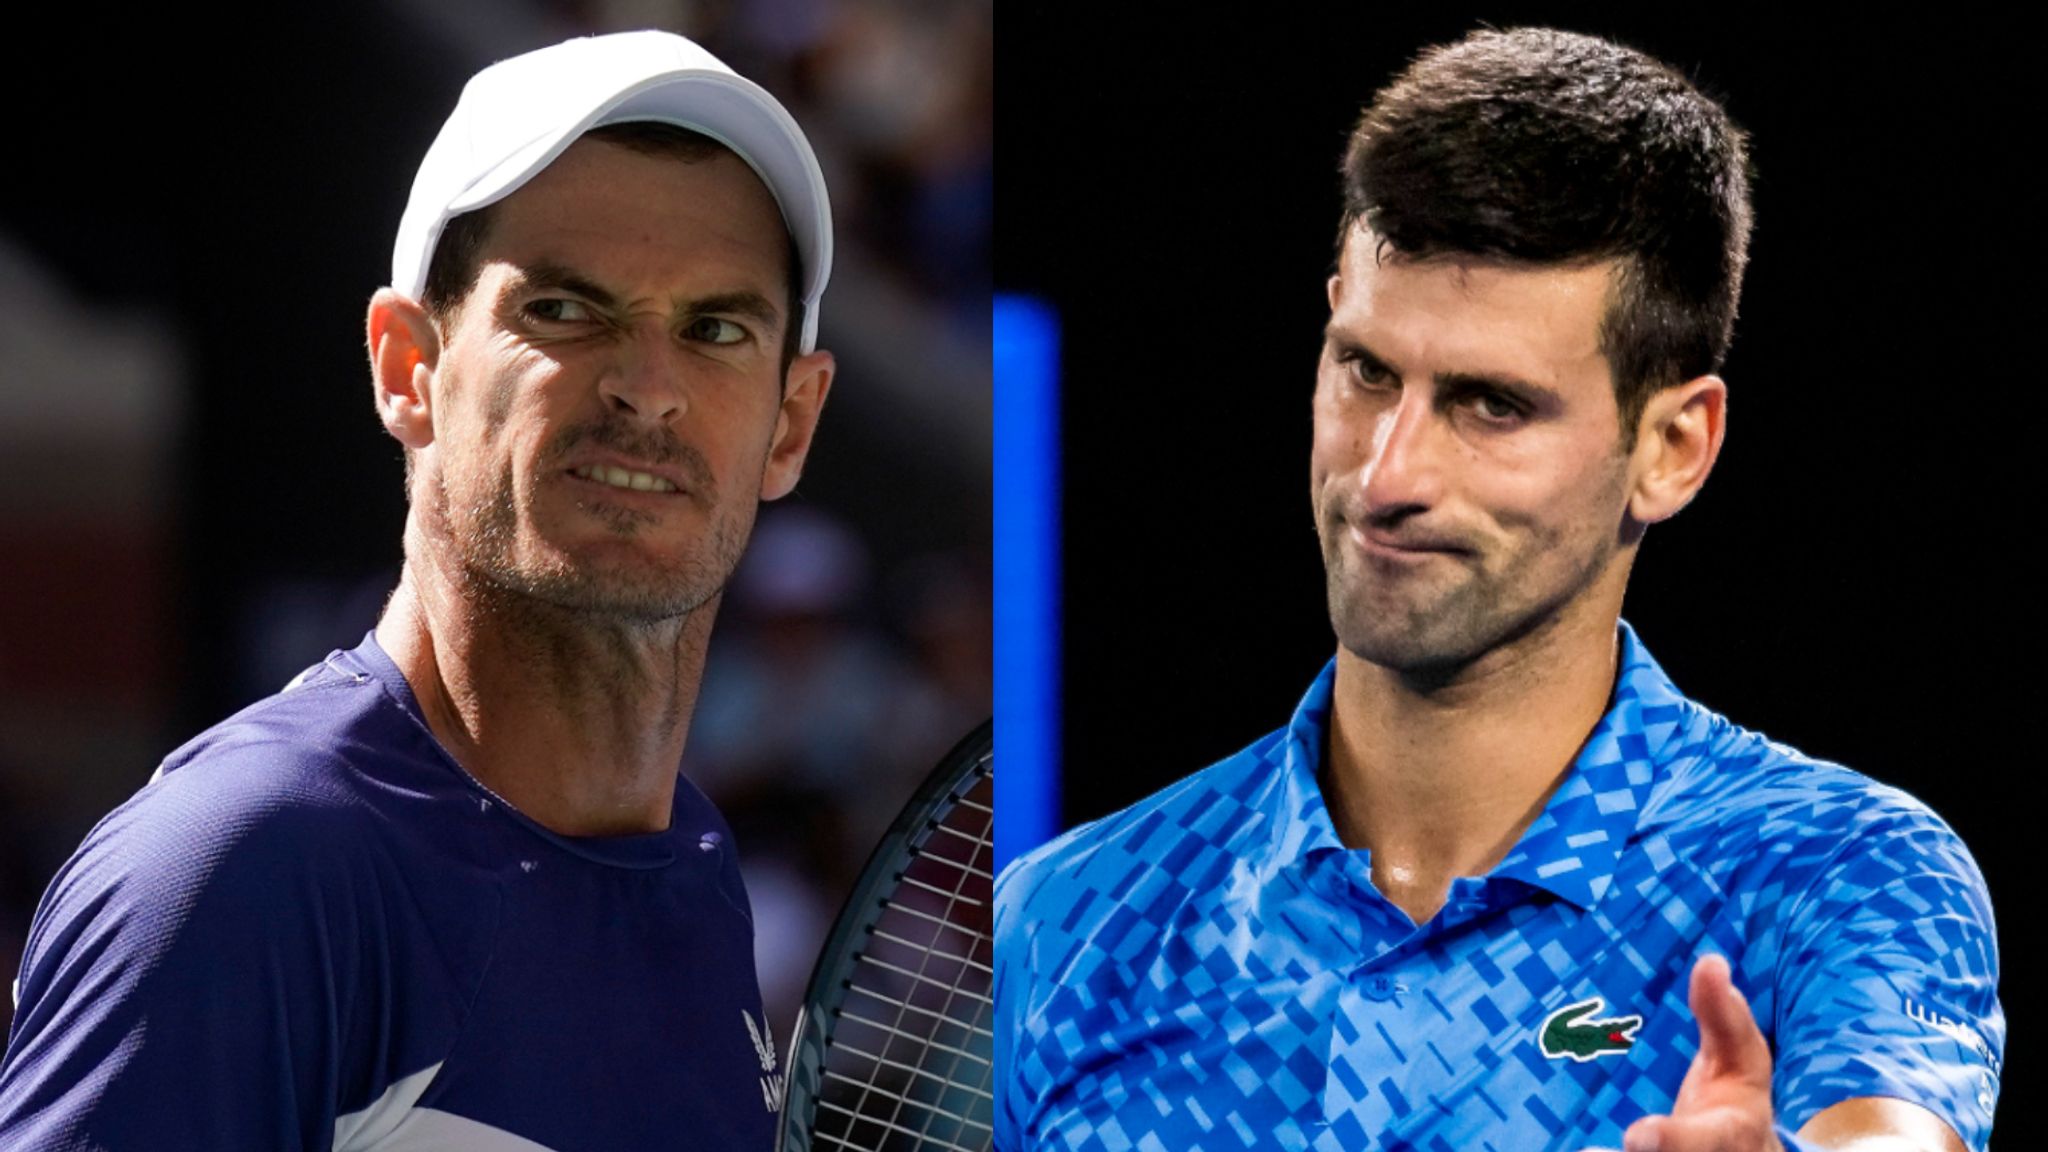 Australian Open Andy Murray hopes to see changes to schedule next year and Novak Djokovic agrees Tennis News Sky Sports